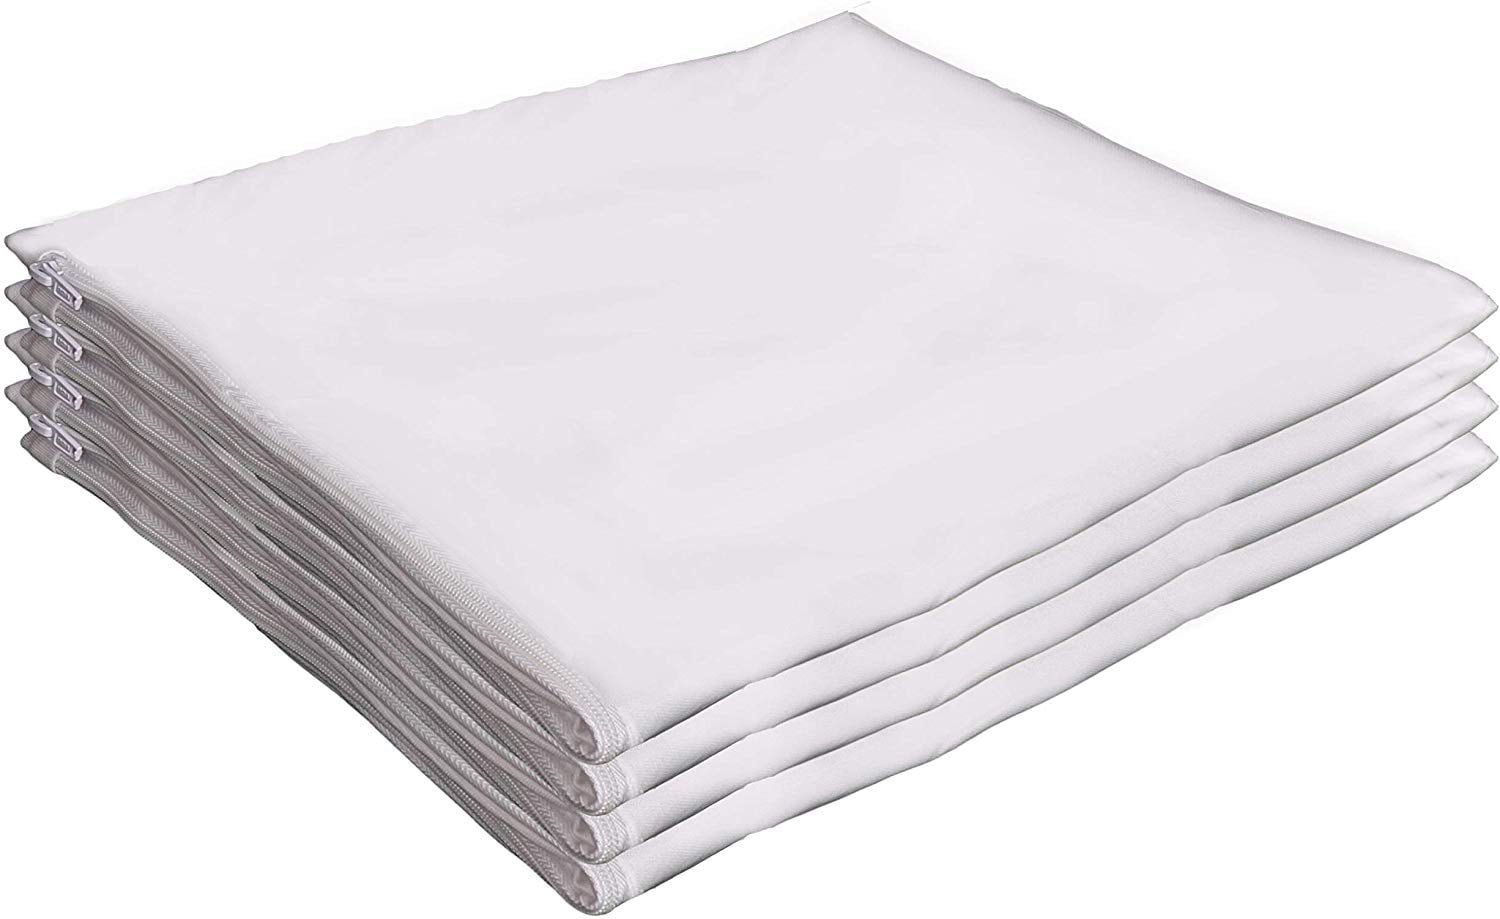 Queen Size 20x30 Inches - 4 Pack Breathable Hypoallergenic Encasement Allergy Relief Dust Mite Control Non Noisy Guardmax Waterproof Pillow Protectors Zippered Covers Bed Bug Proof 